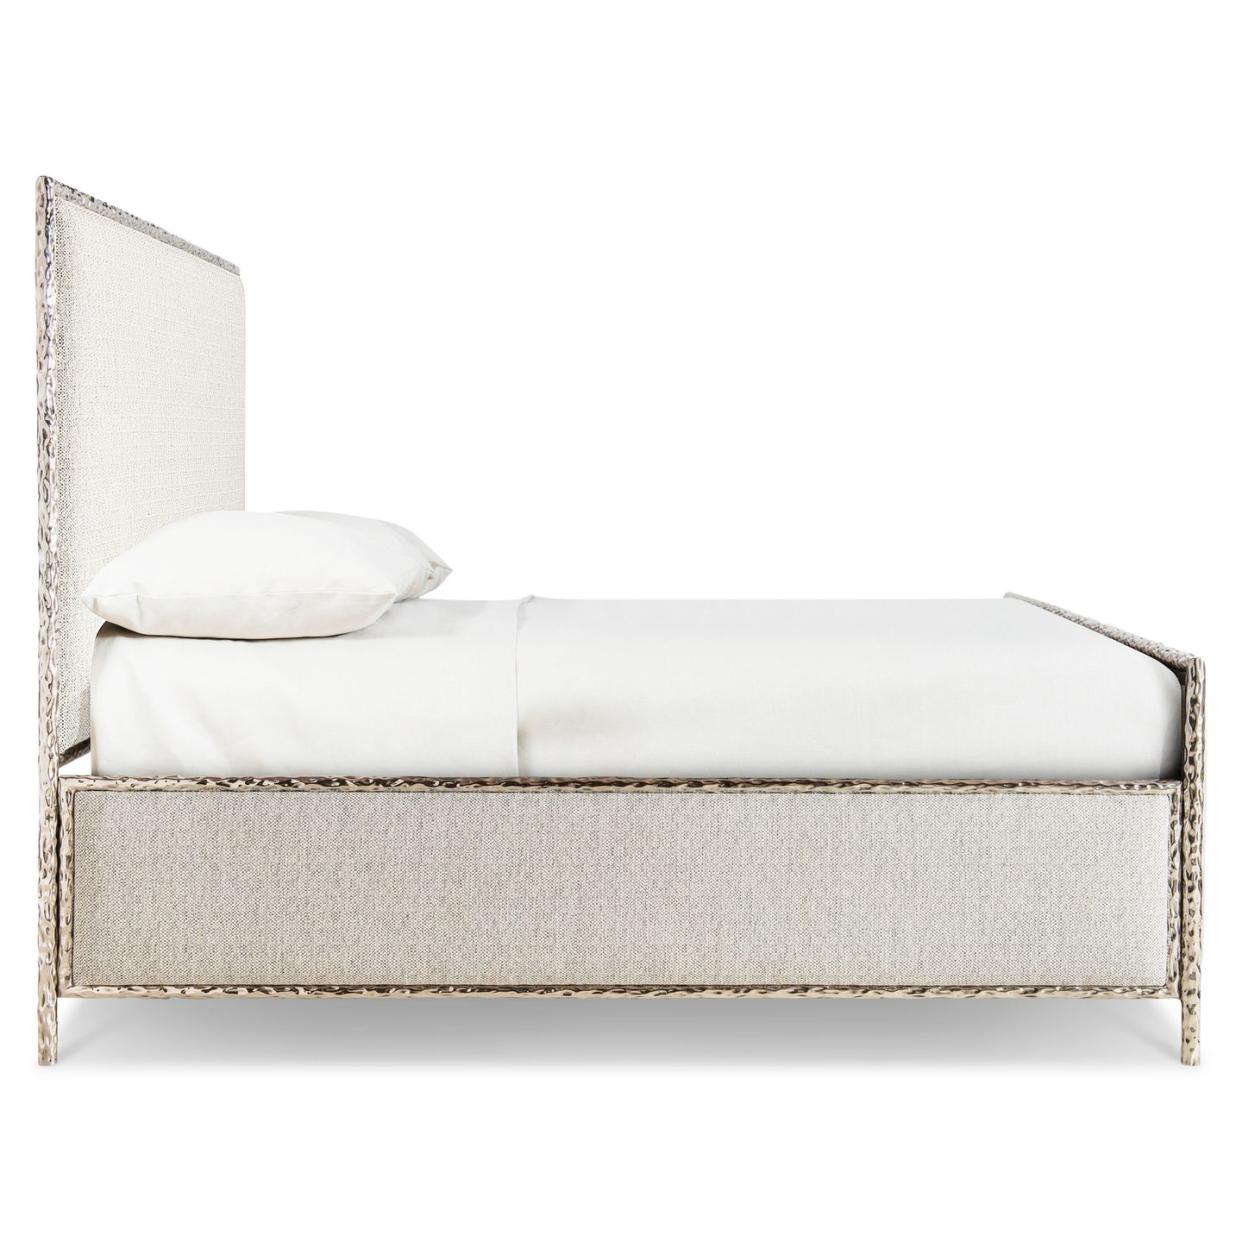 linen platform bed with skinny headboard and patterned trim